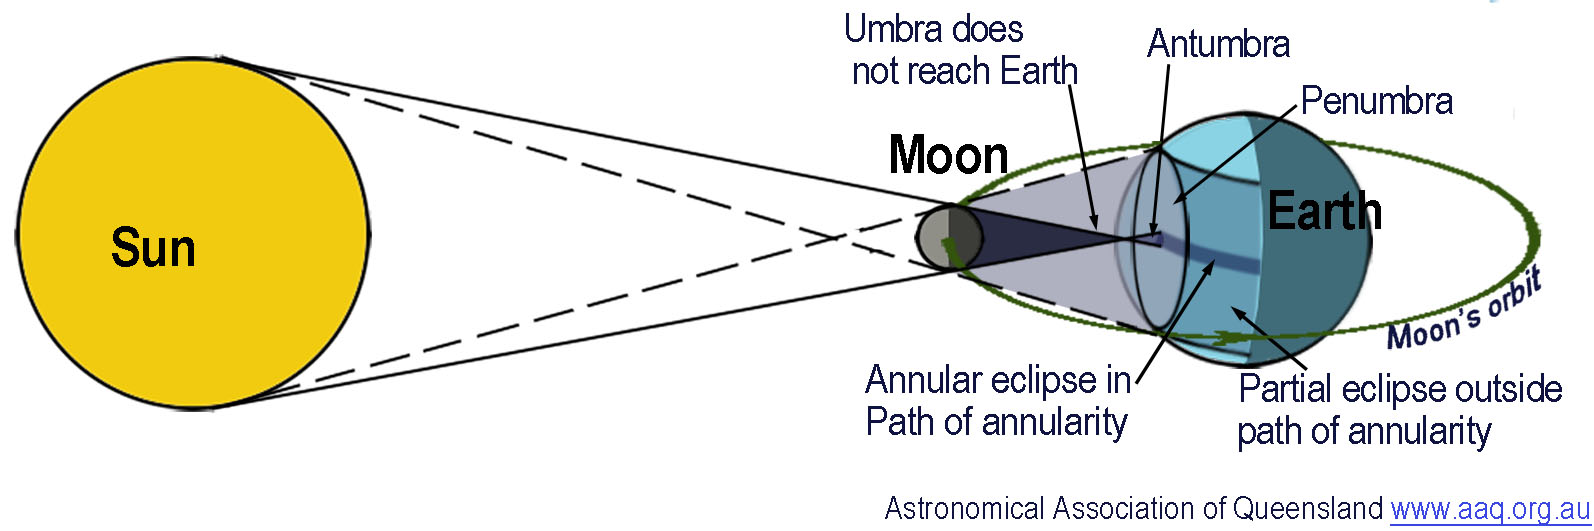 The diagram shows the Moon between the Sun and Earth with the Moon casting a shadow towards Earth. The umbra, which is the central dark part of the Moon’s shadow is shown as a dark cone falling short of reaching Earth. It continues towards Earth expanding as the cone shaped antumbra indicating where the annular solar eclipse occurs. A dark path is shown around Earth labelled as the path of annularity where the annular eclipse moves around Earth as the Moon orbits Earth. The Moon’s penumbra which is the Moon’s lighter outer shadow is shown on Earth surrounding the antumbra and this is shown moving around Earth indicating where a partial solar eclipse occurs on either side of the path of annularity.